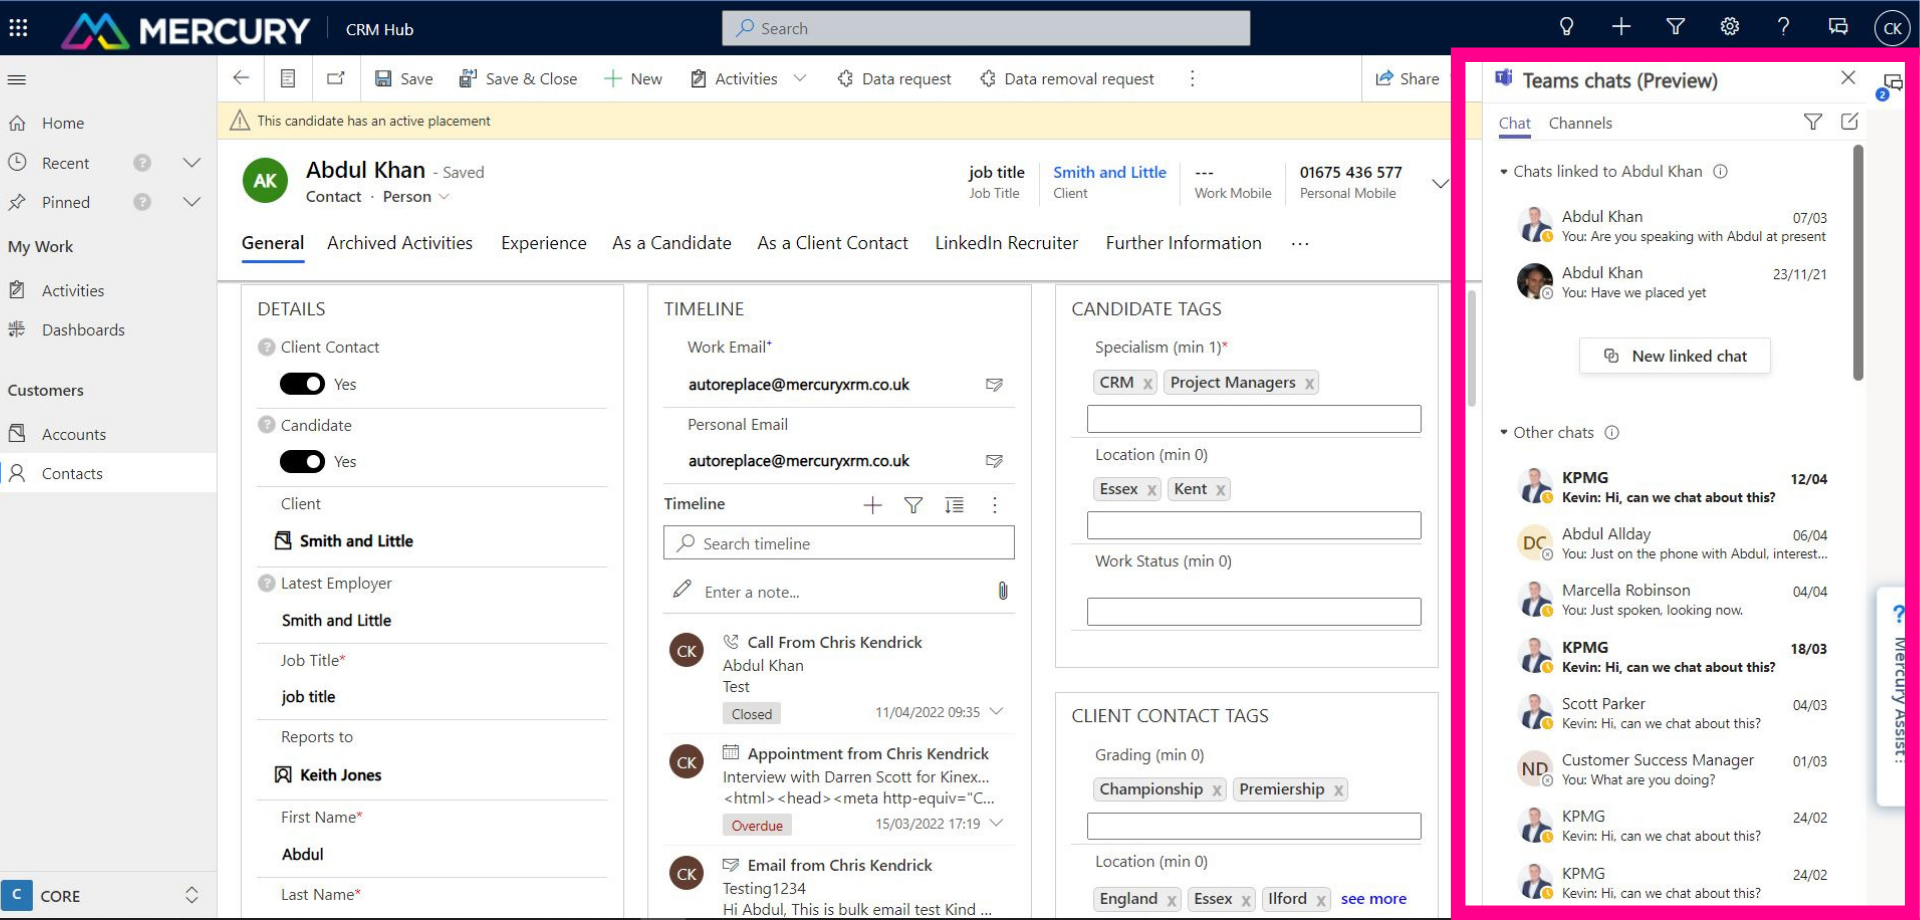 use Microsoft Teams WITHIN your Mercury CRM. Collaborate with your team at a click of a button, and all linked communications are synced to the relevant CRM record!